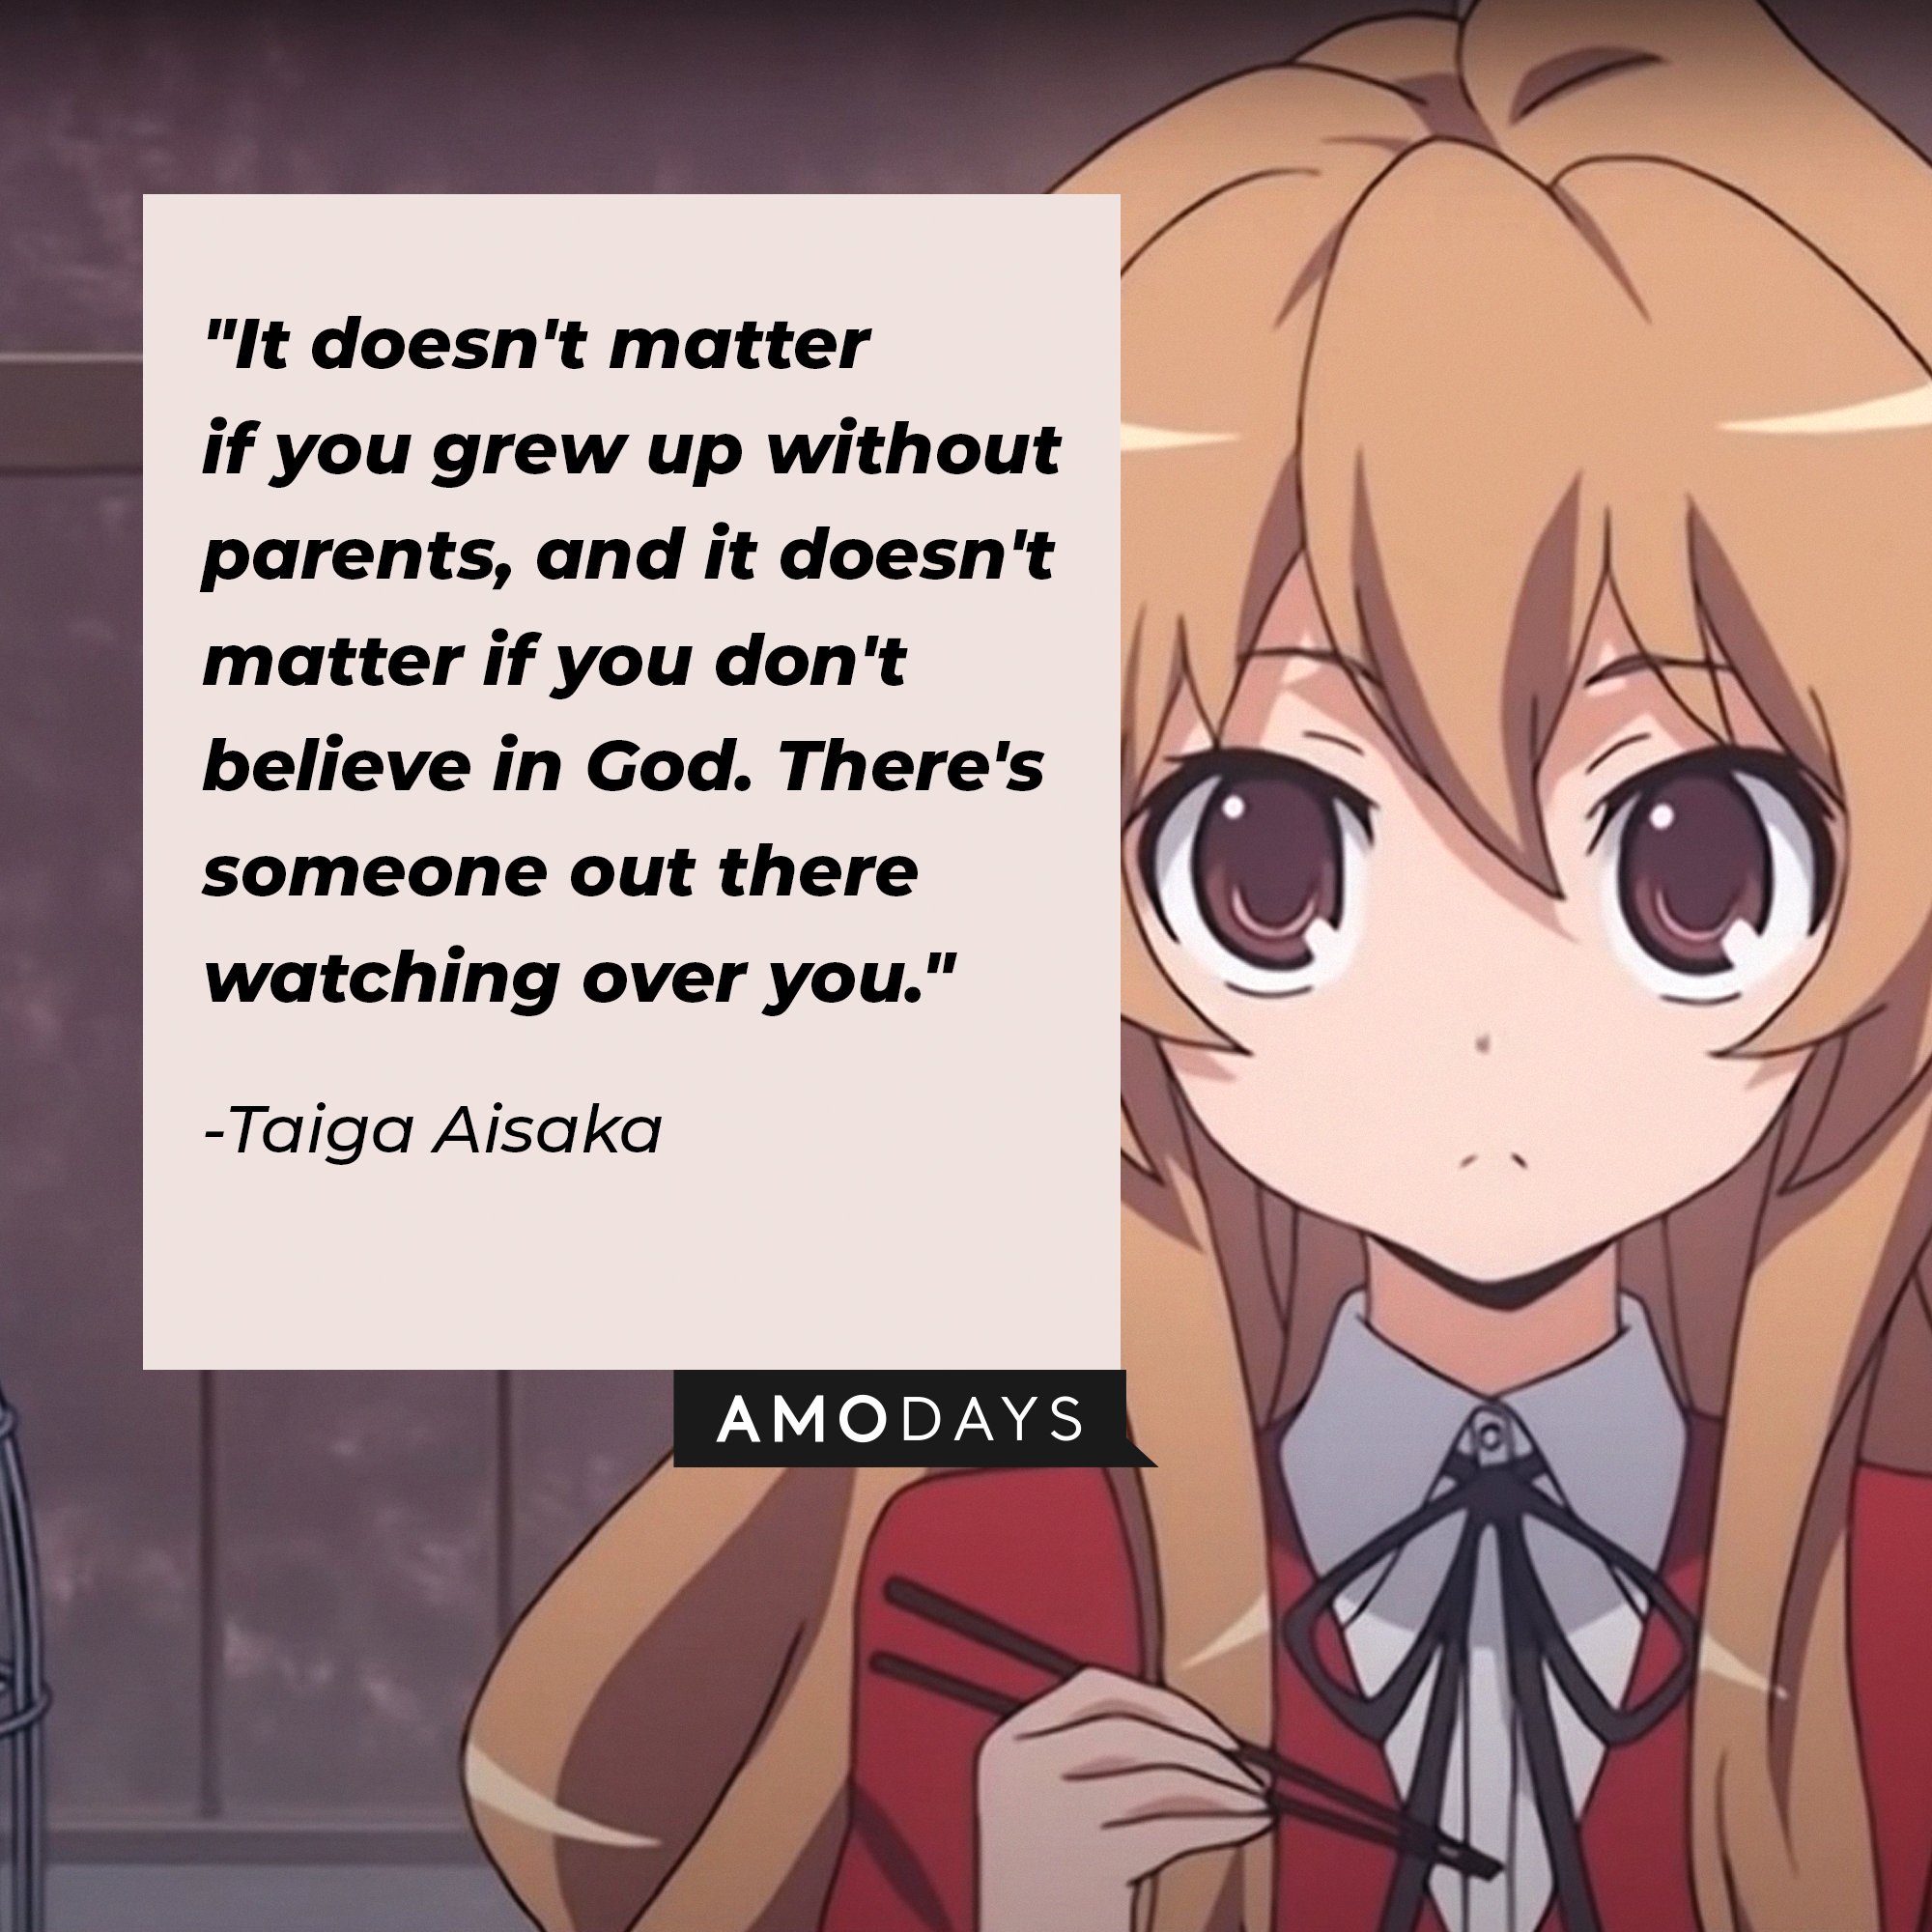 Taiga Aisaka’s quote: "It doesn't matter if you grew up without parents, and it doesn't matter if you don't believe in God. There's someone out there watching over you." | Image: AmoDays